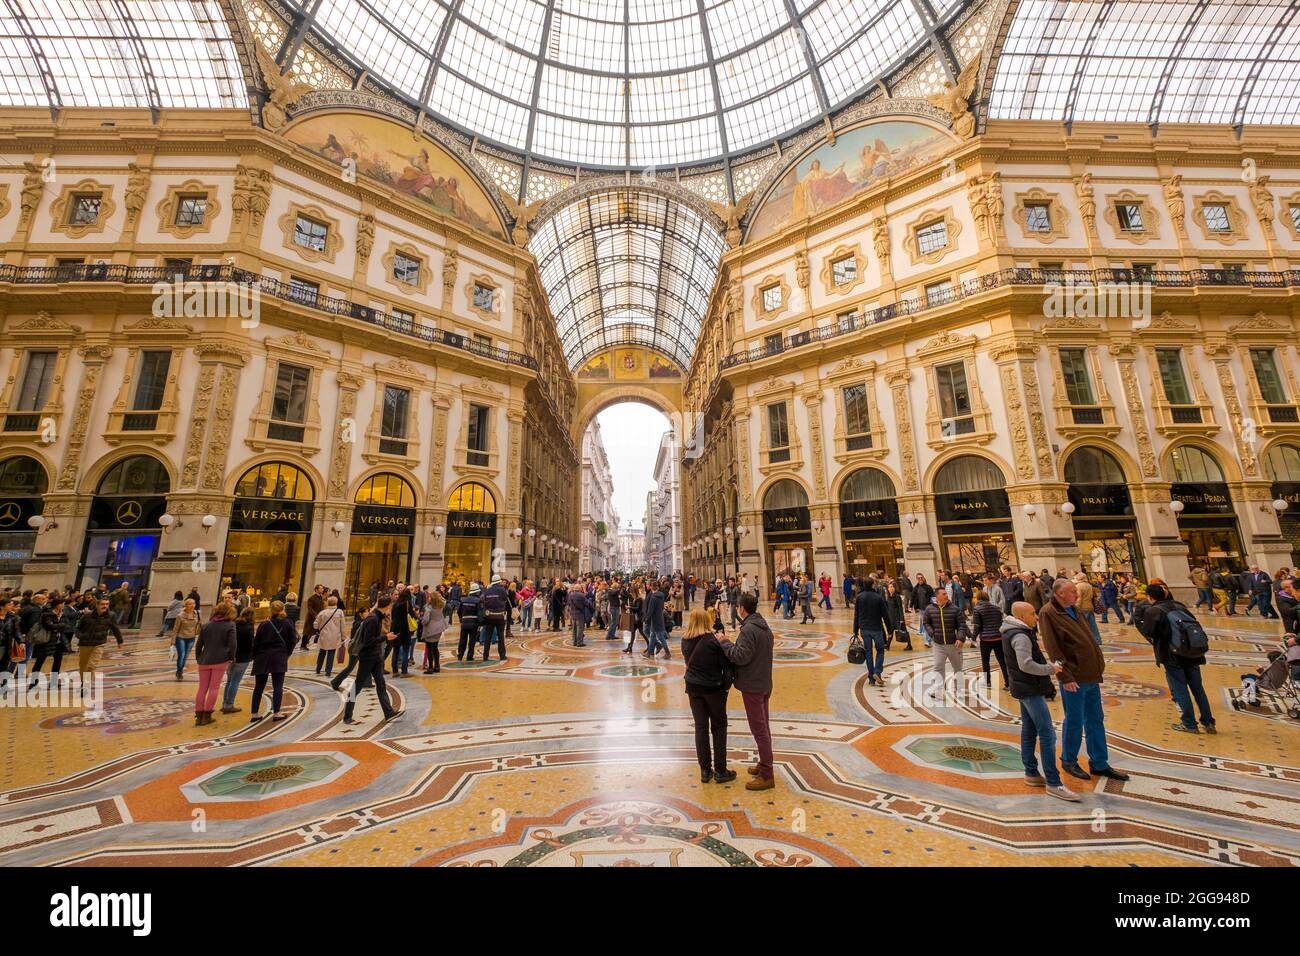 People strolling and shopping through the center of the arcade. At the Galleria Vittorio Emanuele II in Milan, Italy. Stock Photo